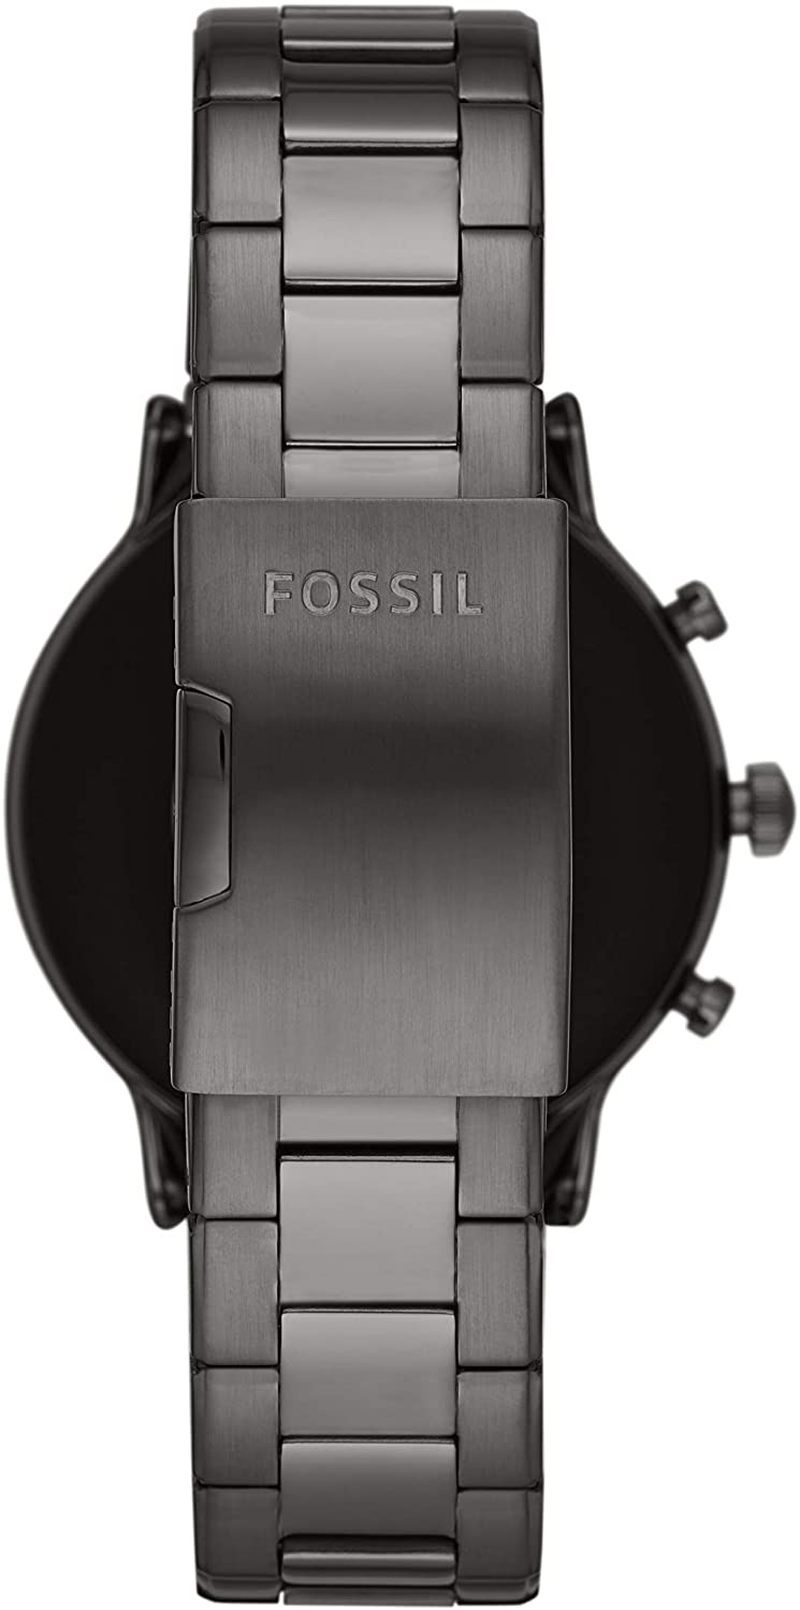 Fossil Gen 5 Carlyle Stainless Steel Touchscreen Smartwatch with Speaker, Heart Rate, GPS, Contactless Payments, and Smartphone Notifications Apparel & Accessories > Jewelry > Watches Fossil   